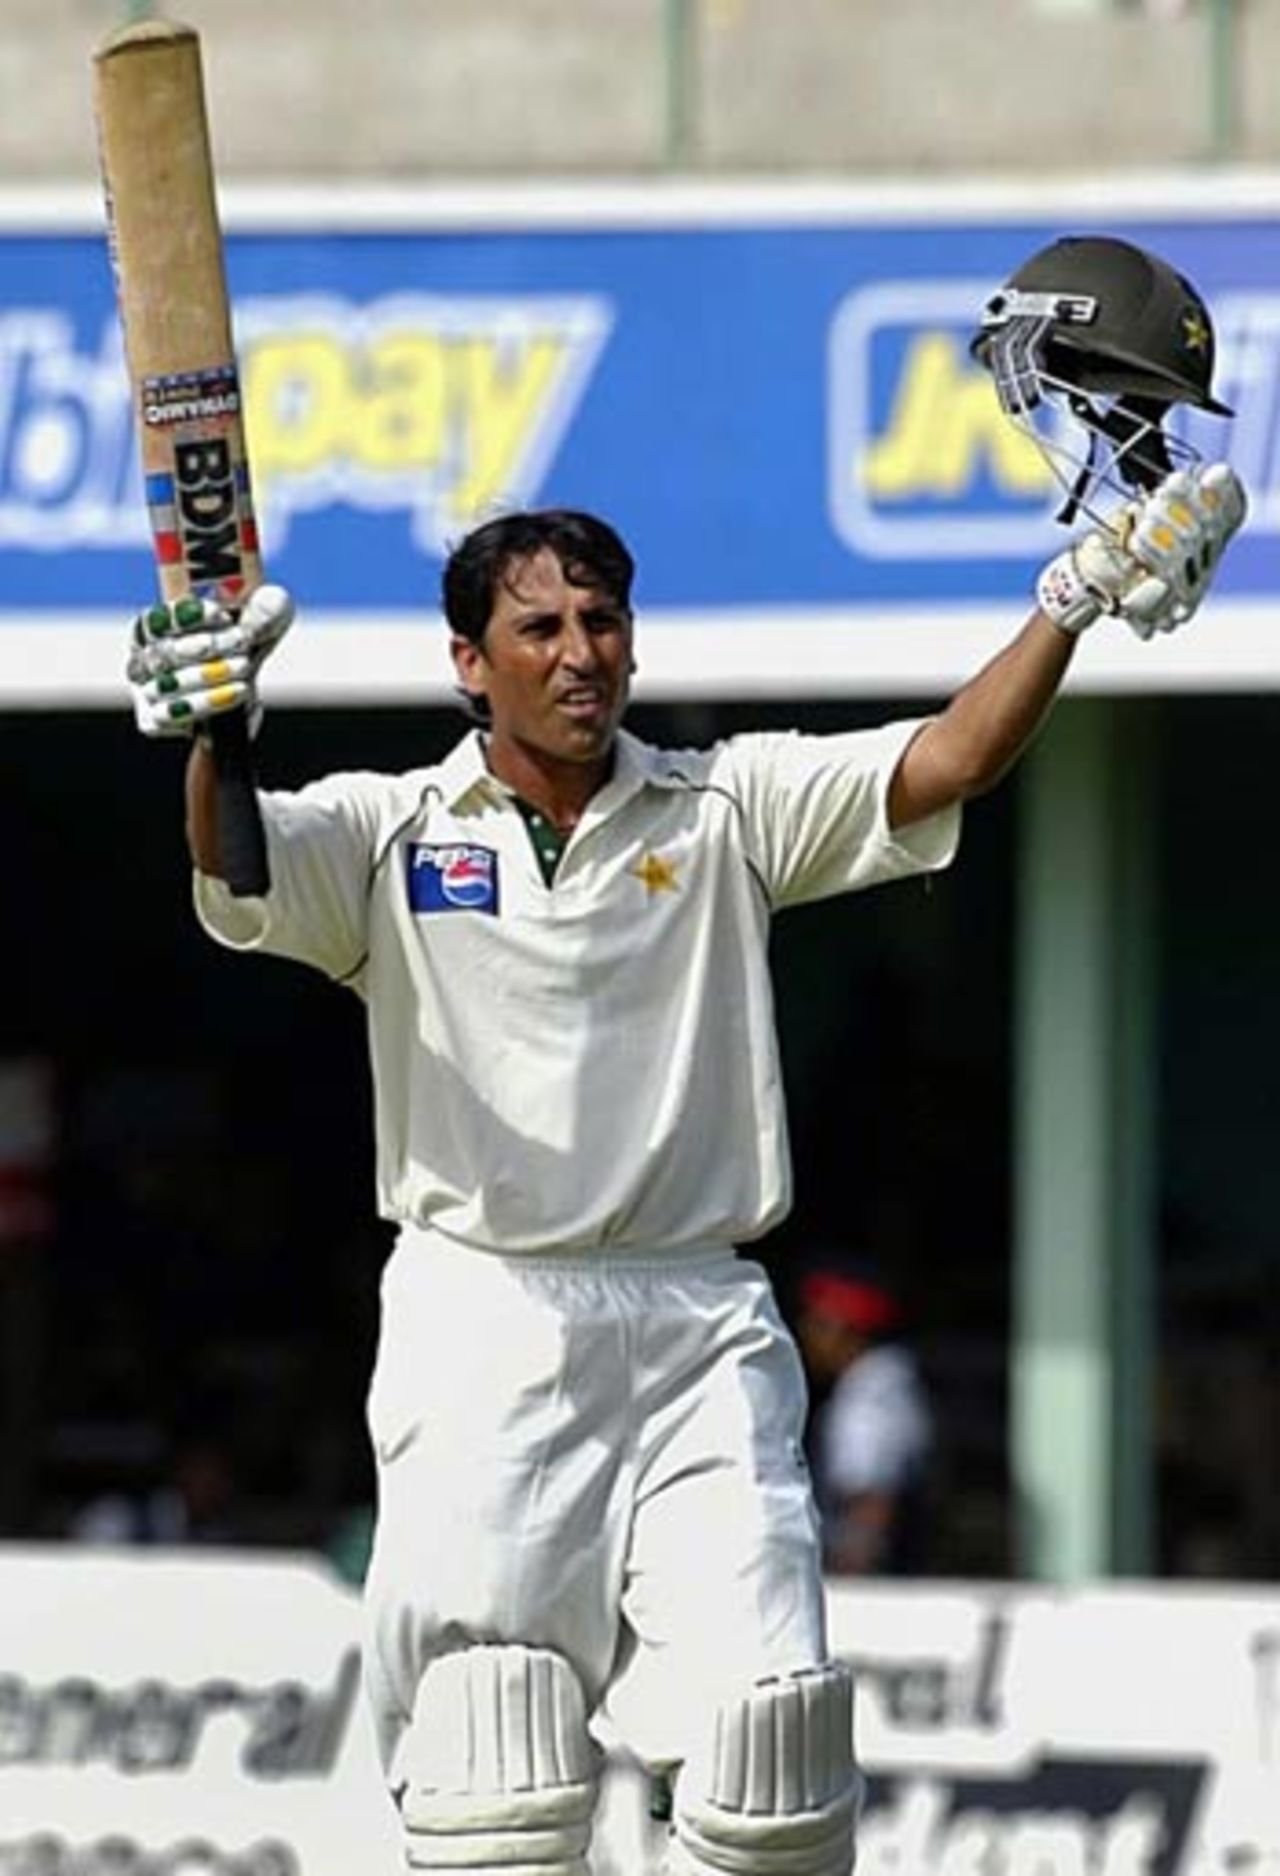 Younis Khan acknowledges the crowd after reaching his hundred, West Indies v Pakistan, 2nd Test, Jamaica, June 3, 2005